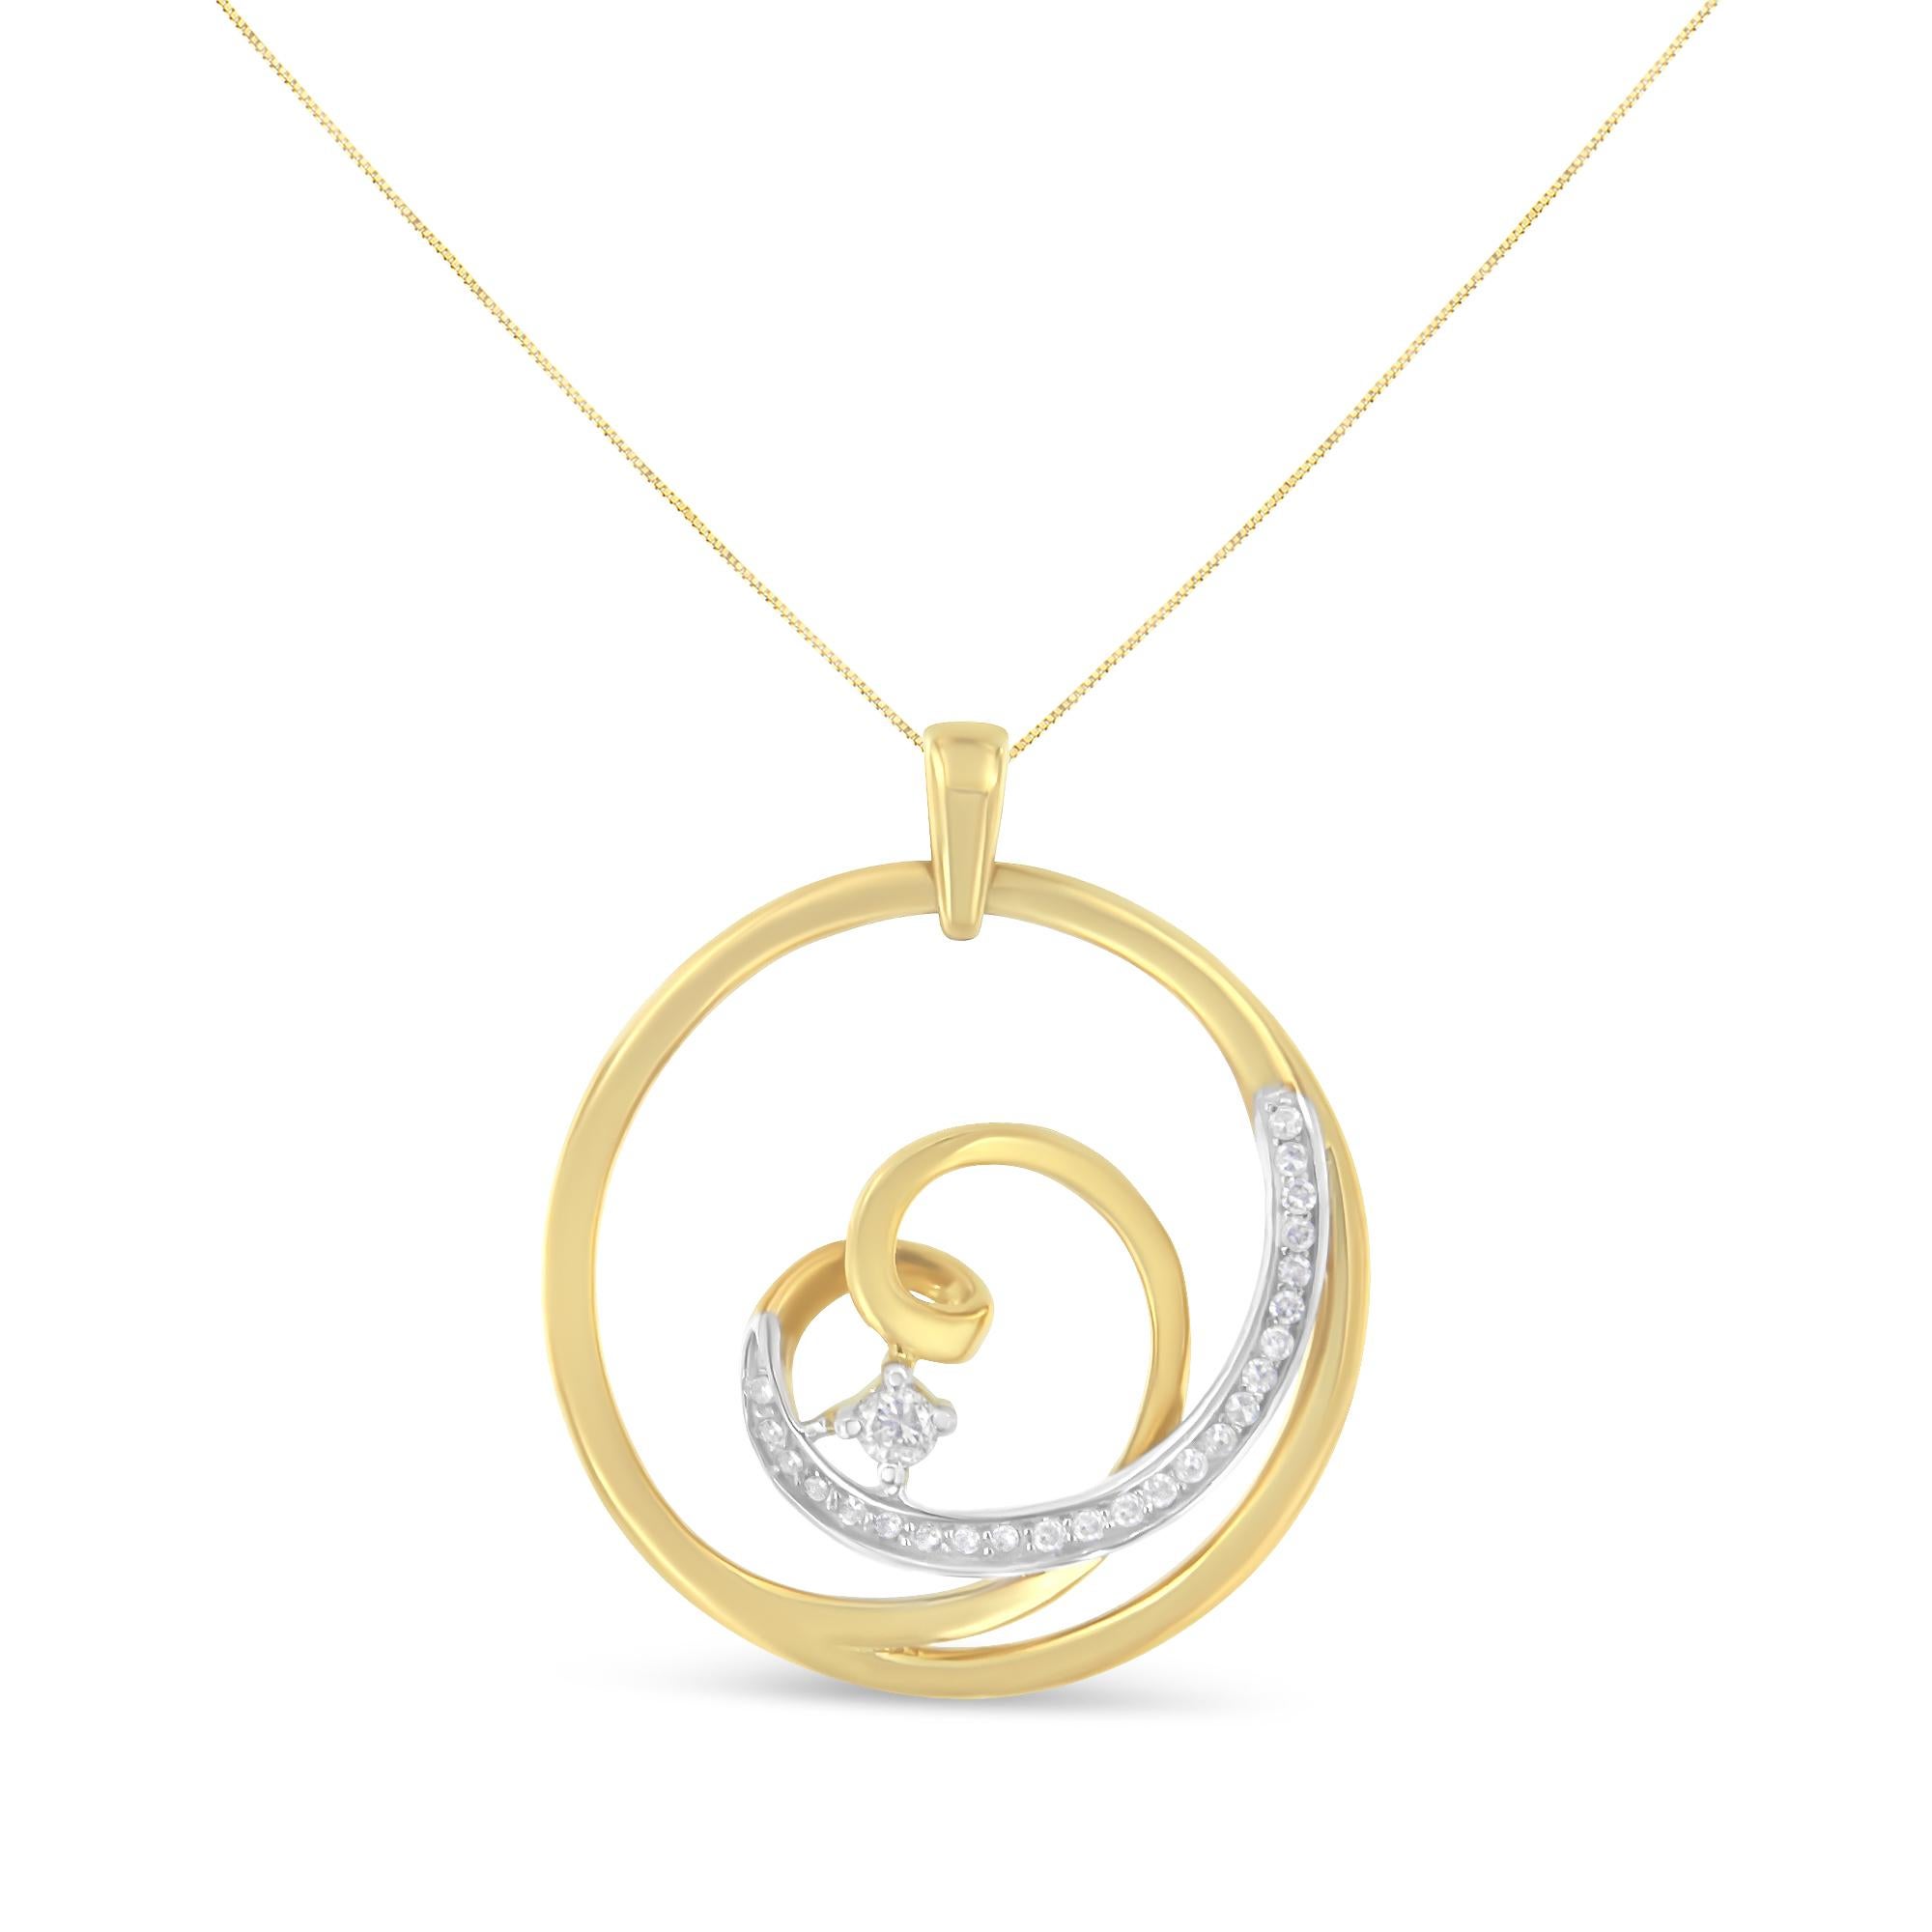 A forever favorite, this dazzling heart accent pendant will make a fantastic addition to your wardrobe. The circular pendant captures the sparkling round cut diamond and a diamond solitaire as well. Framed in a stunning design, the neckpiece is